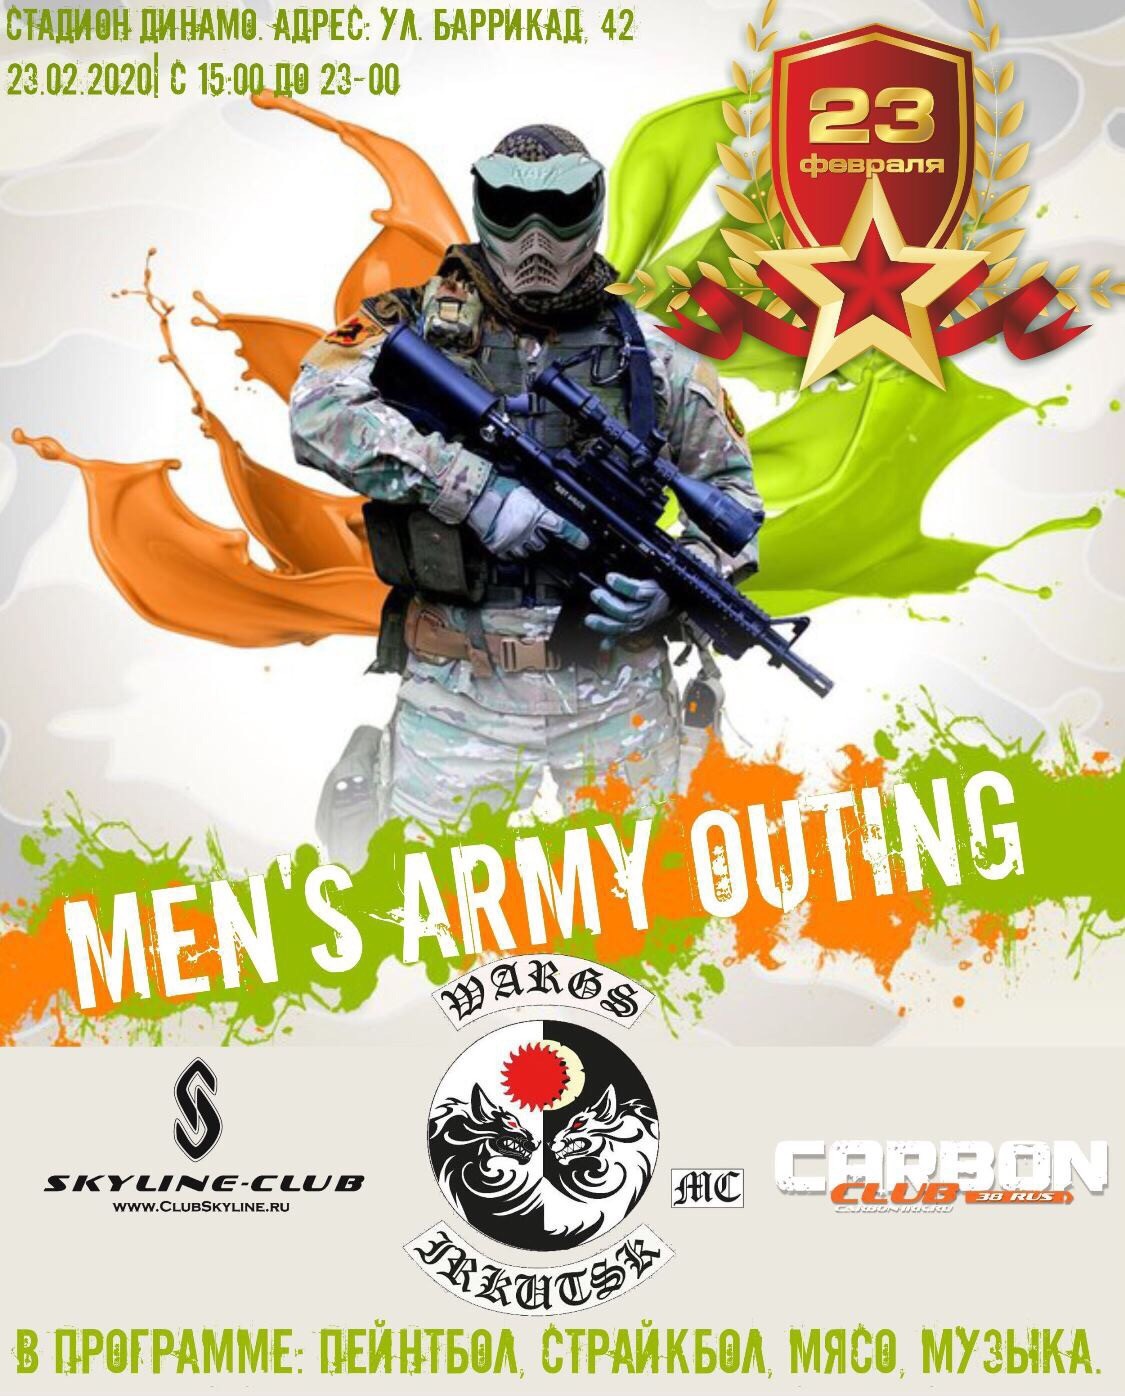 men's army outing